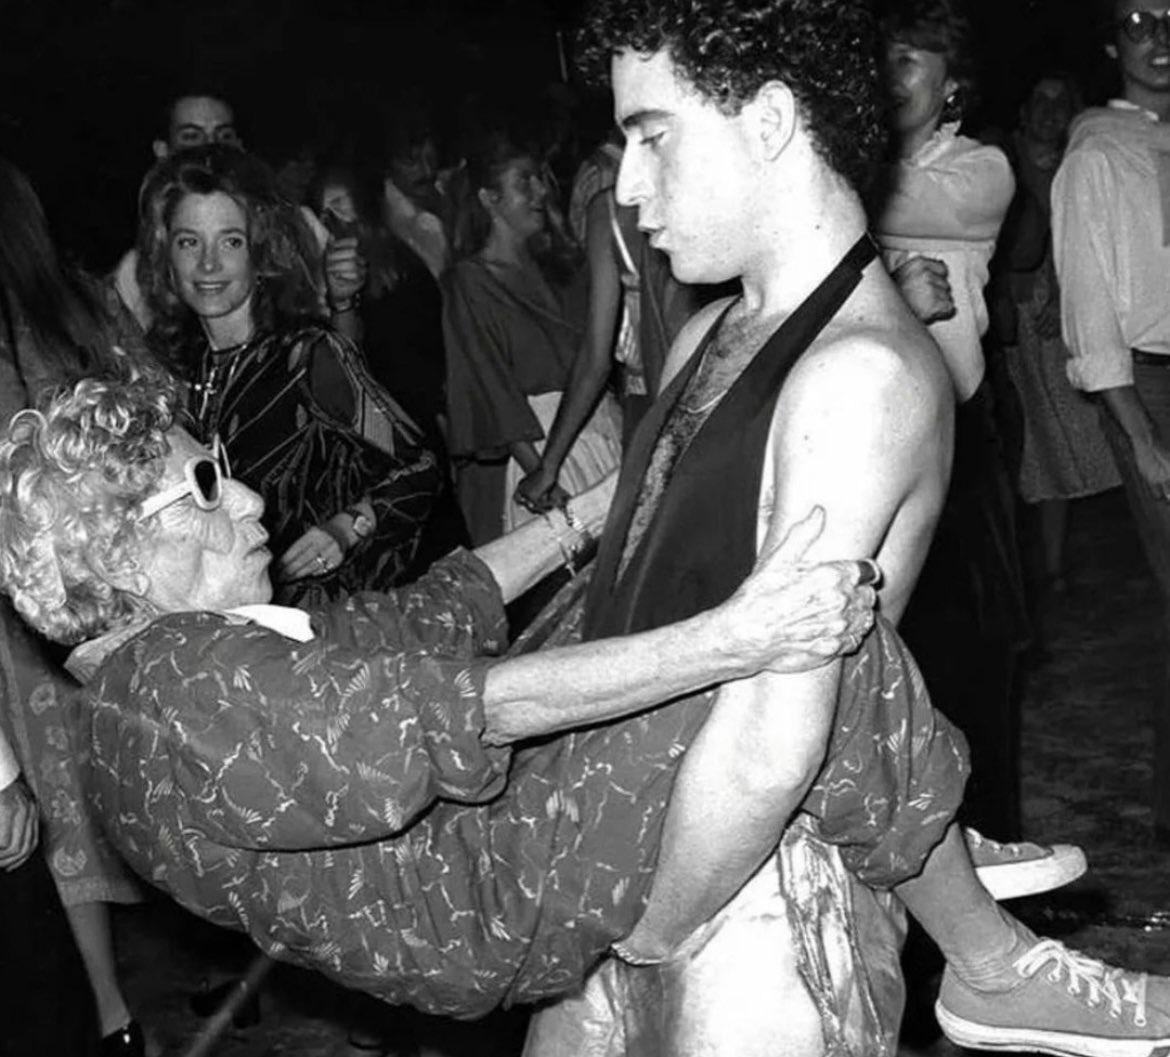 A girl identified as “Disco Sally” dances along with her “husband” at Studio 54, 1978